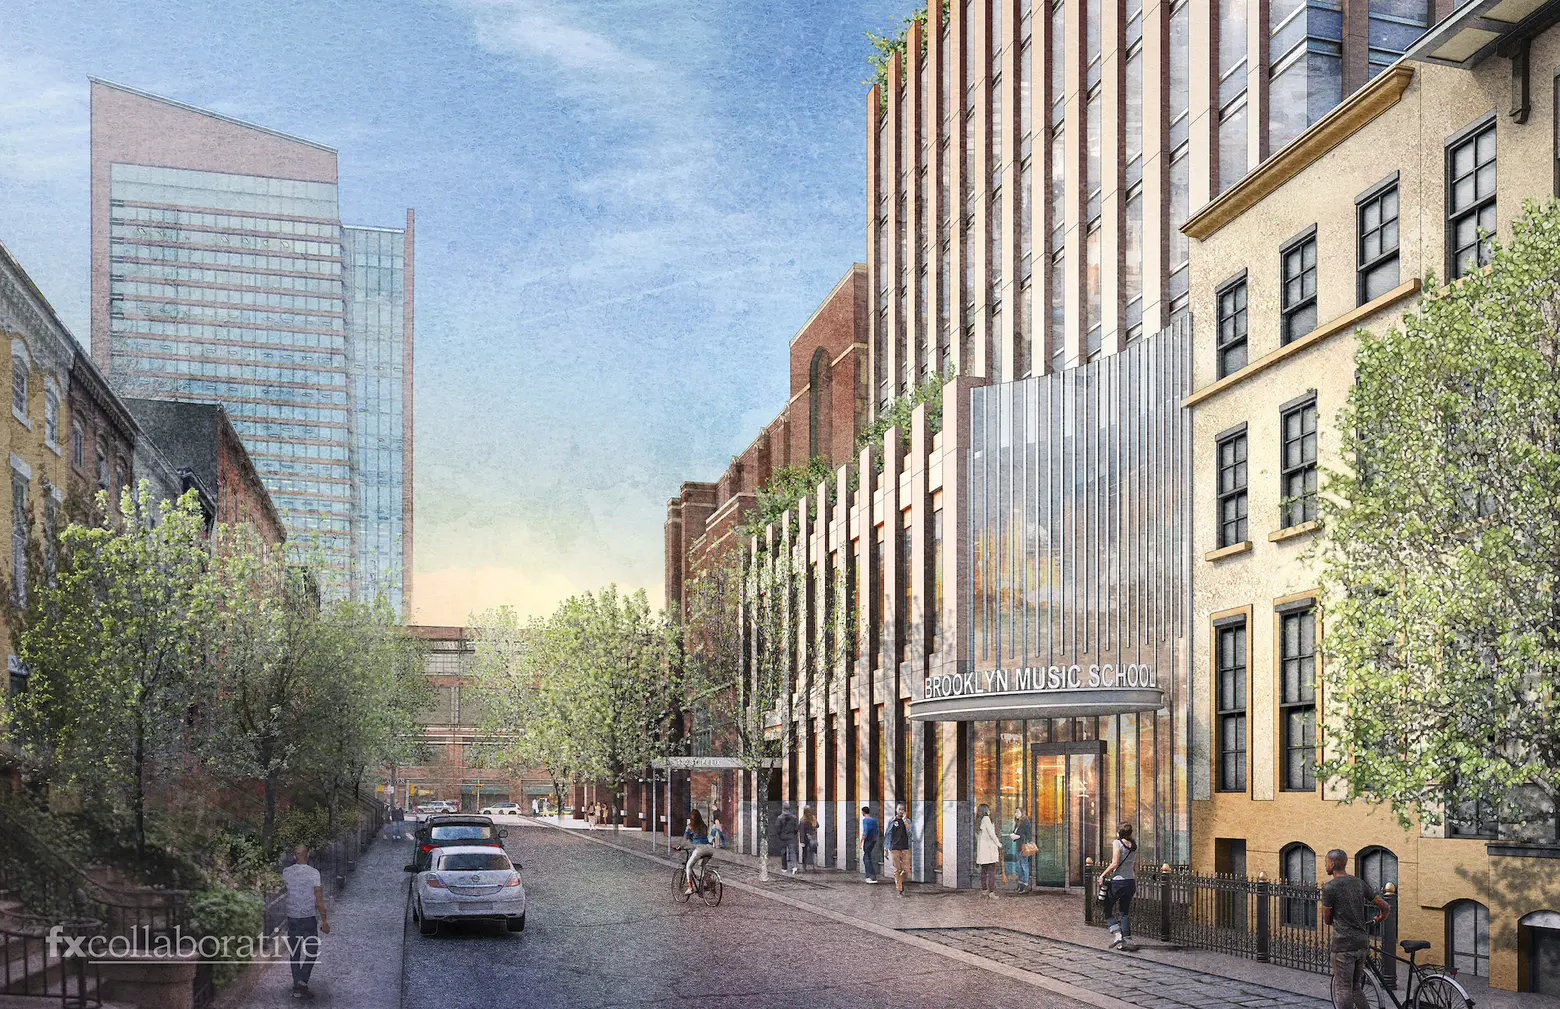 New renderings revealed for FXCollaborative-designed Brooklyn Music School expansion